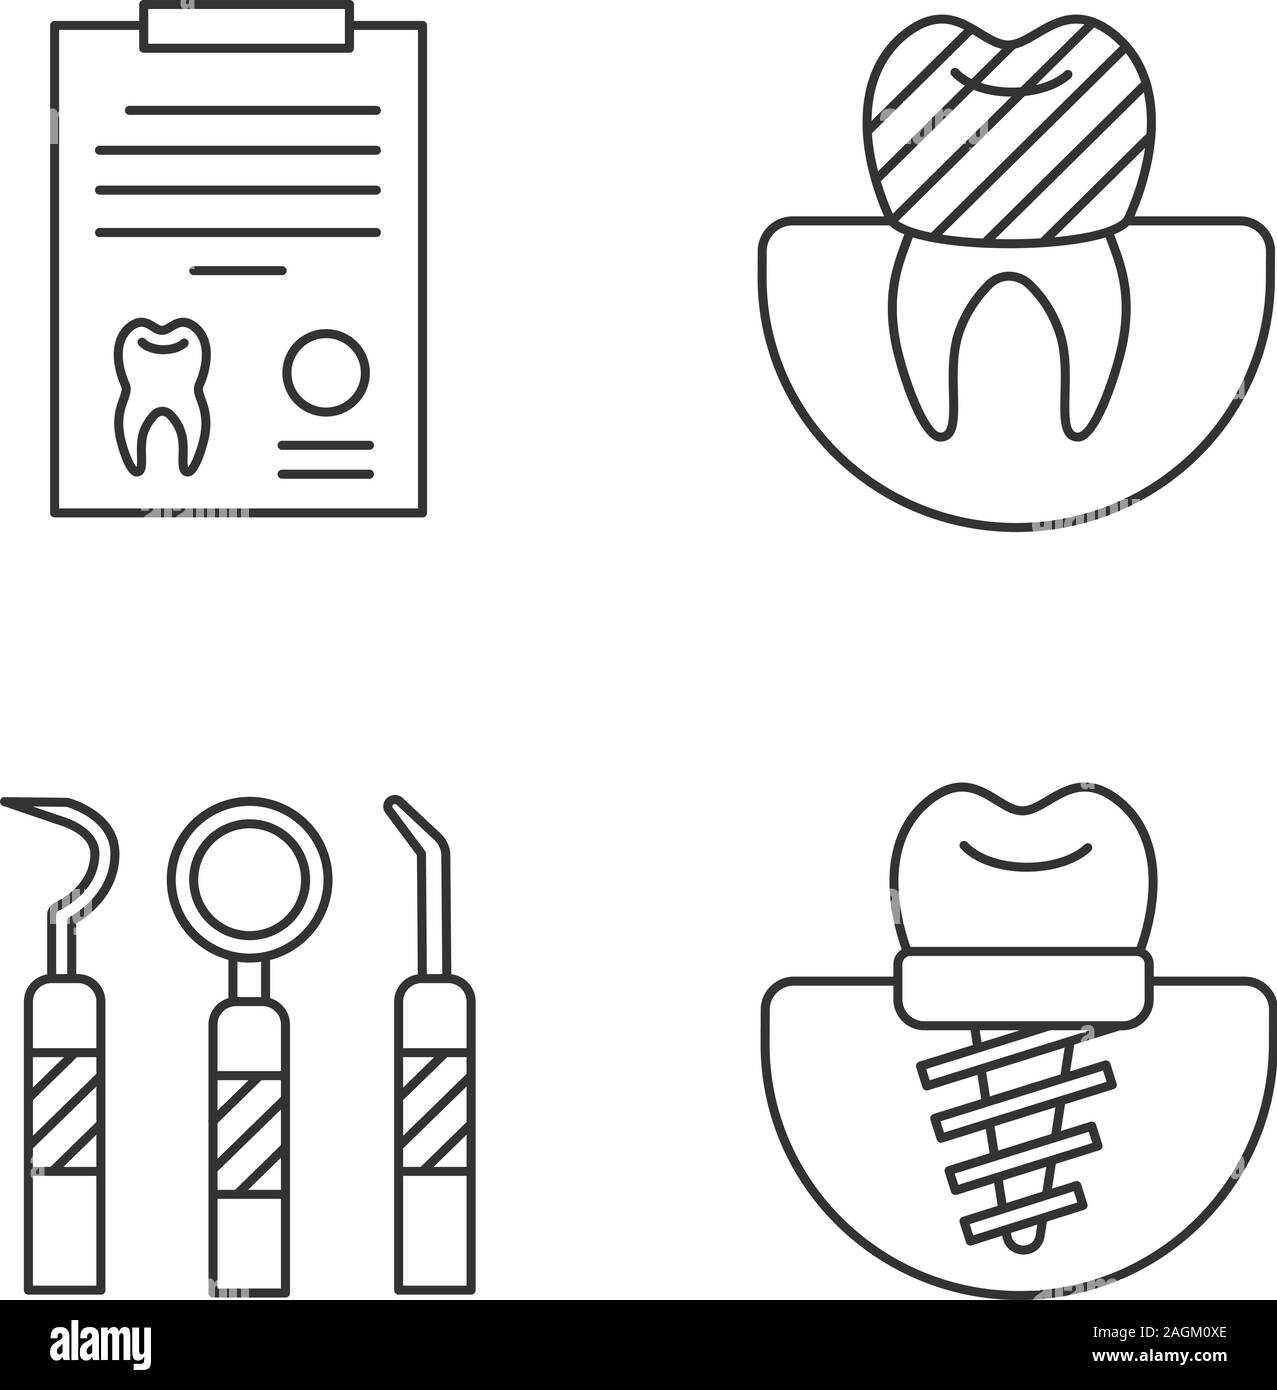 Dentistry linear icons set. Stomatology. Diagnostic report, tooth implant and crown, dental instruments. Thin line contour symbols. Isolated vector ou Stock Vector